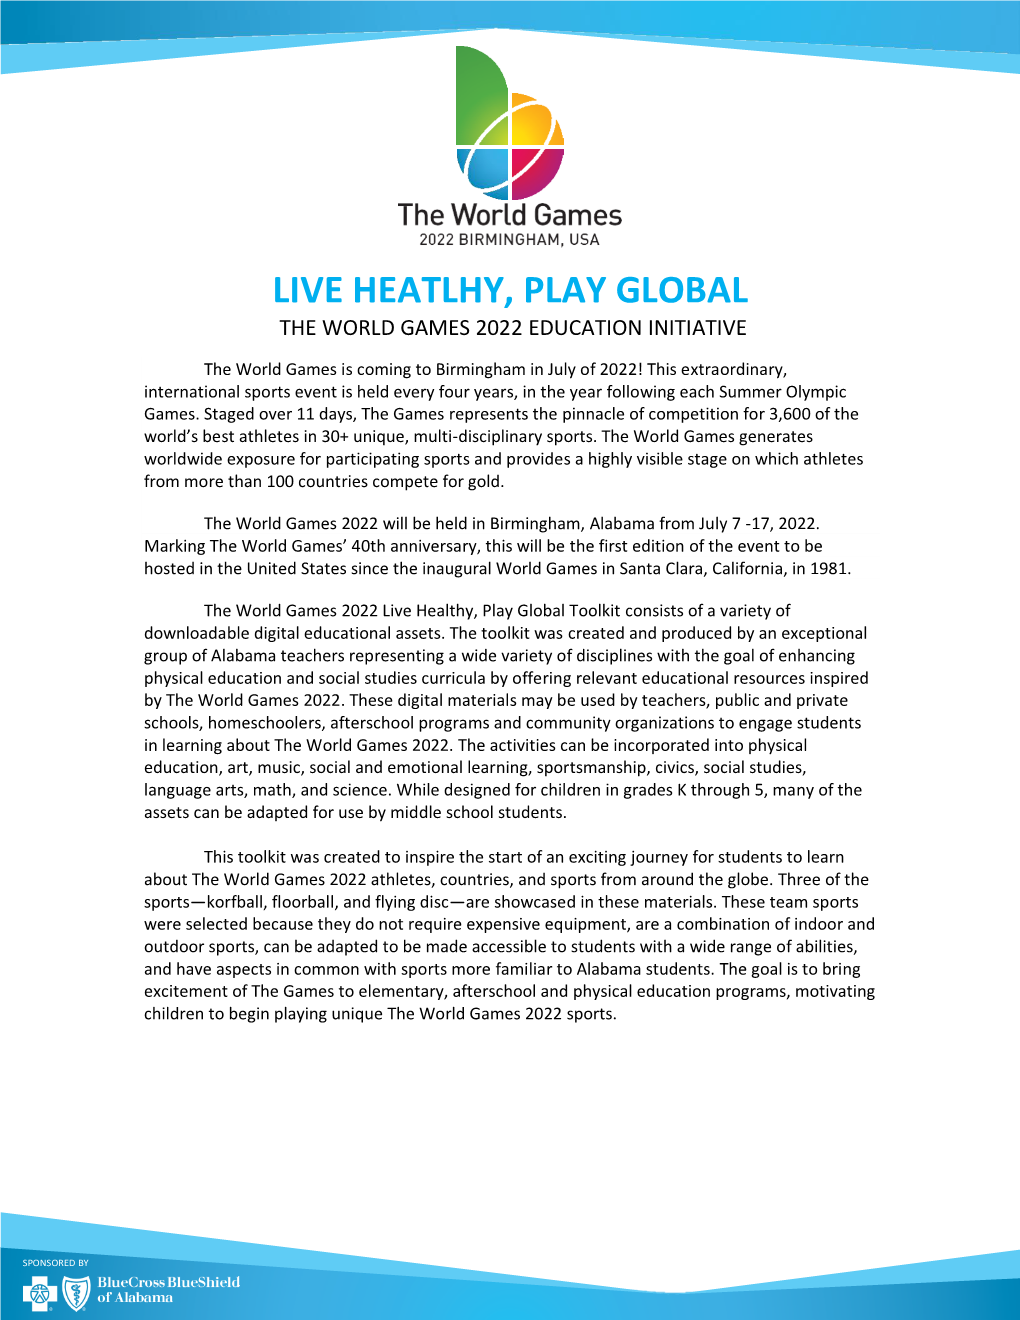 Live Heatlhy, Play Global the World Games 2022 Education Initiative